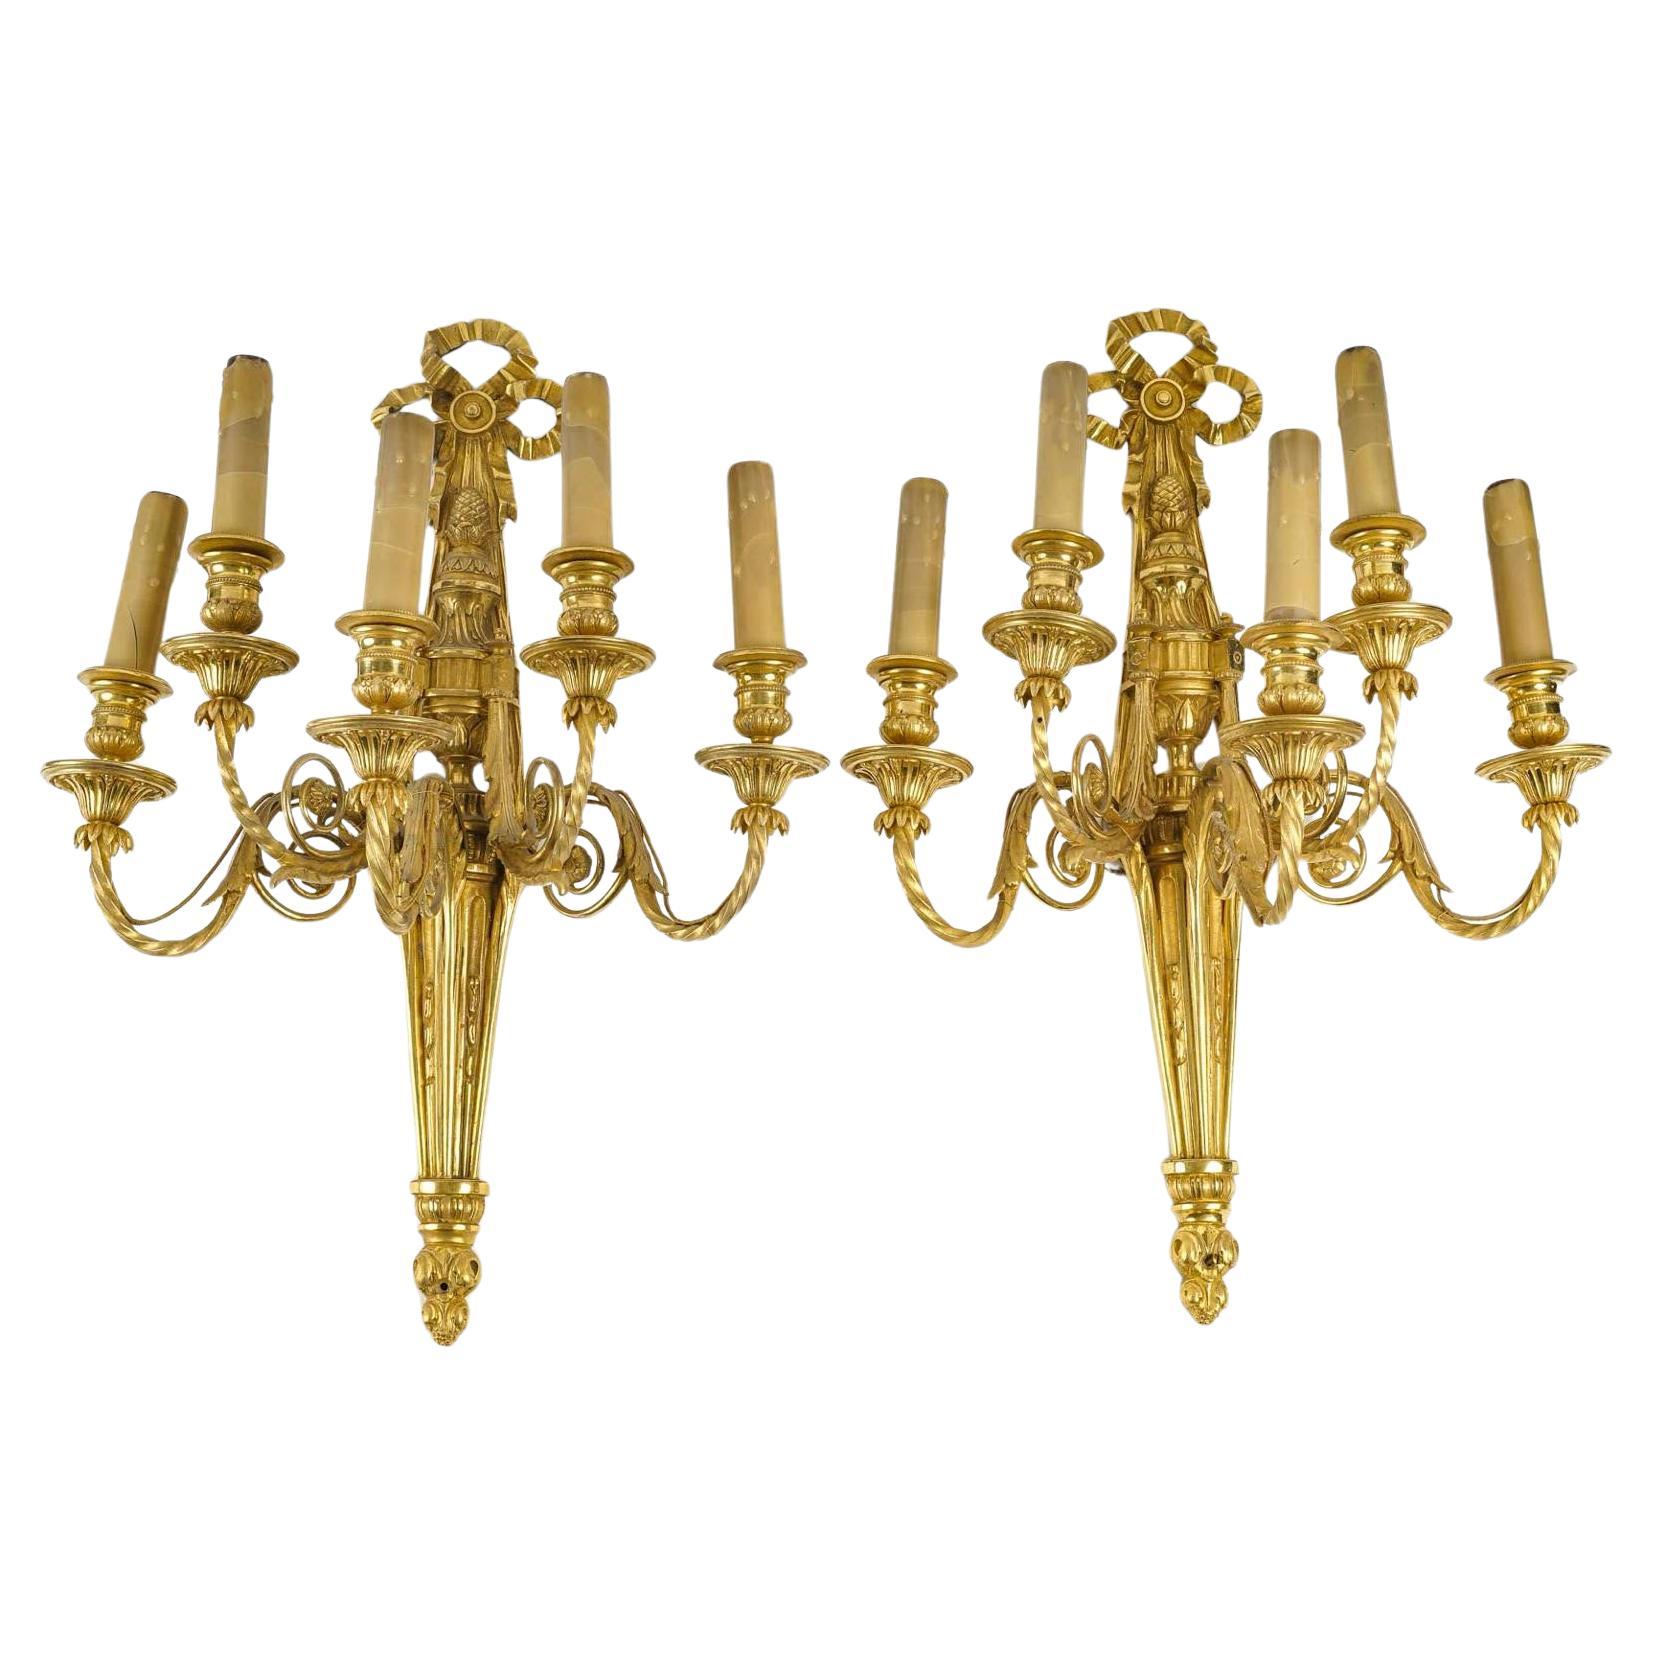 Pair of Louis XVI Style Wall Lights in Chased and Gilt Bronze.